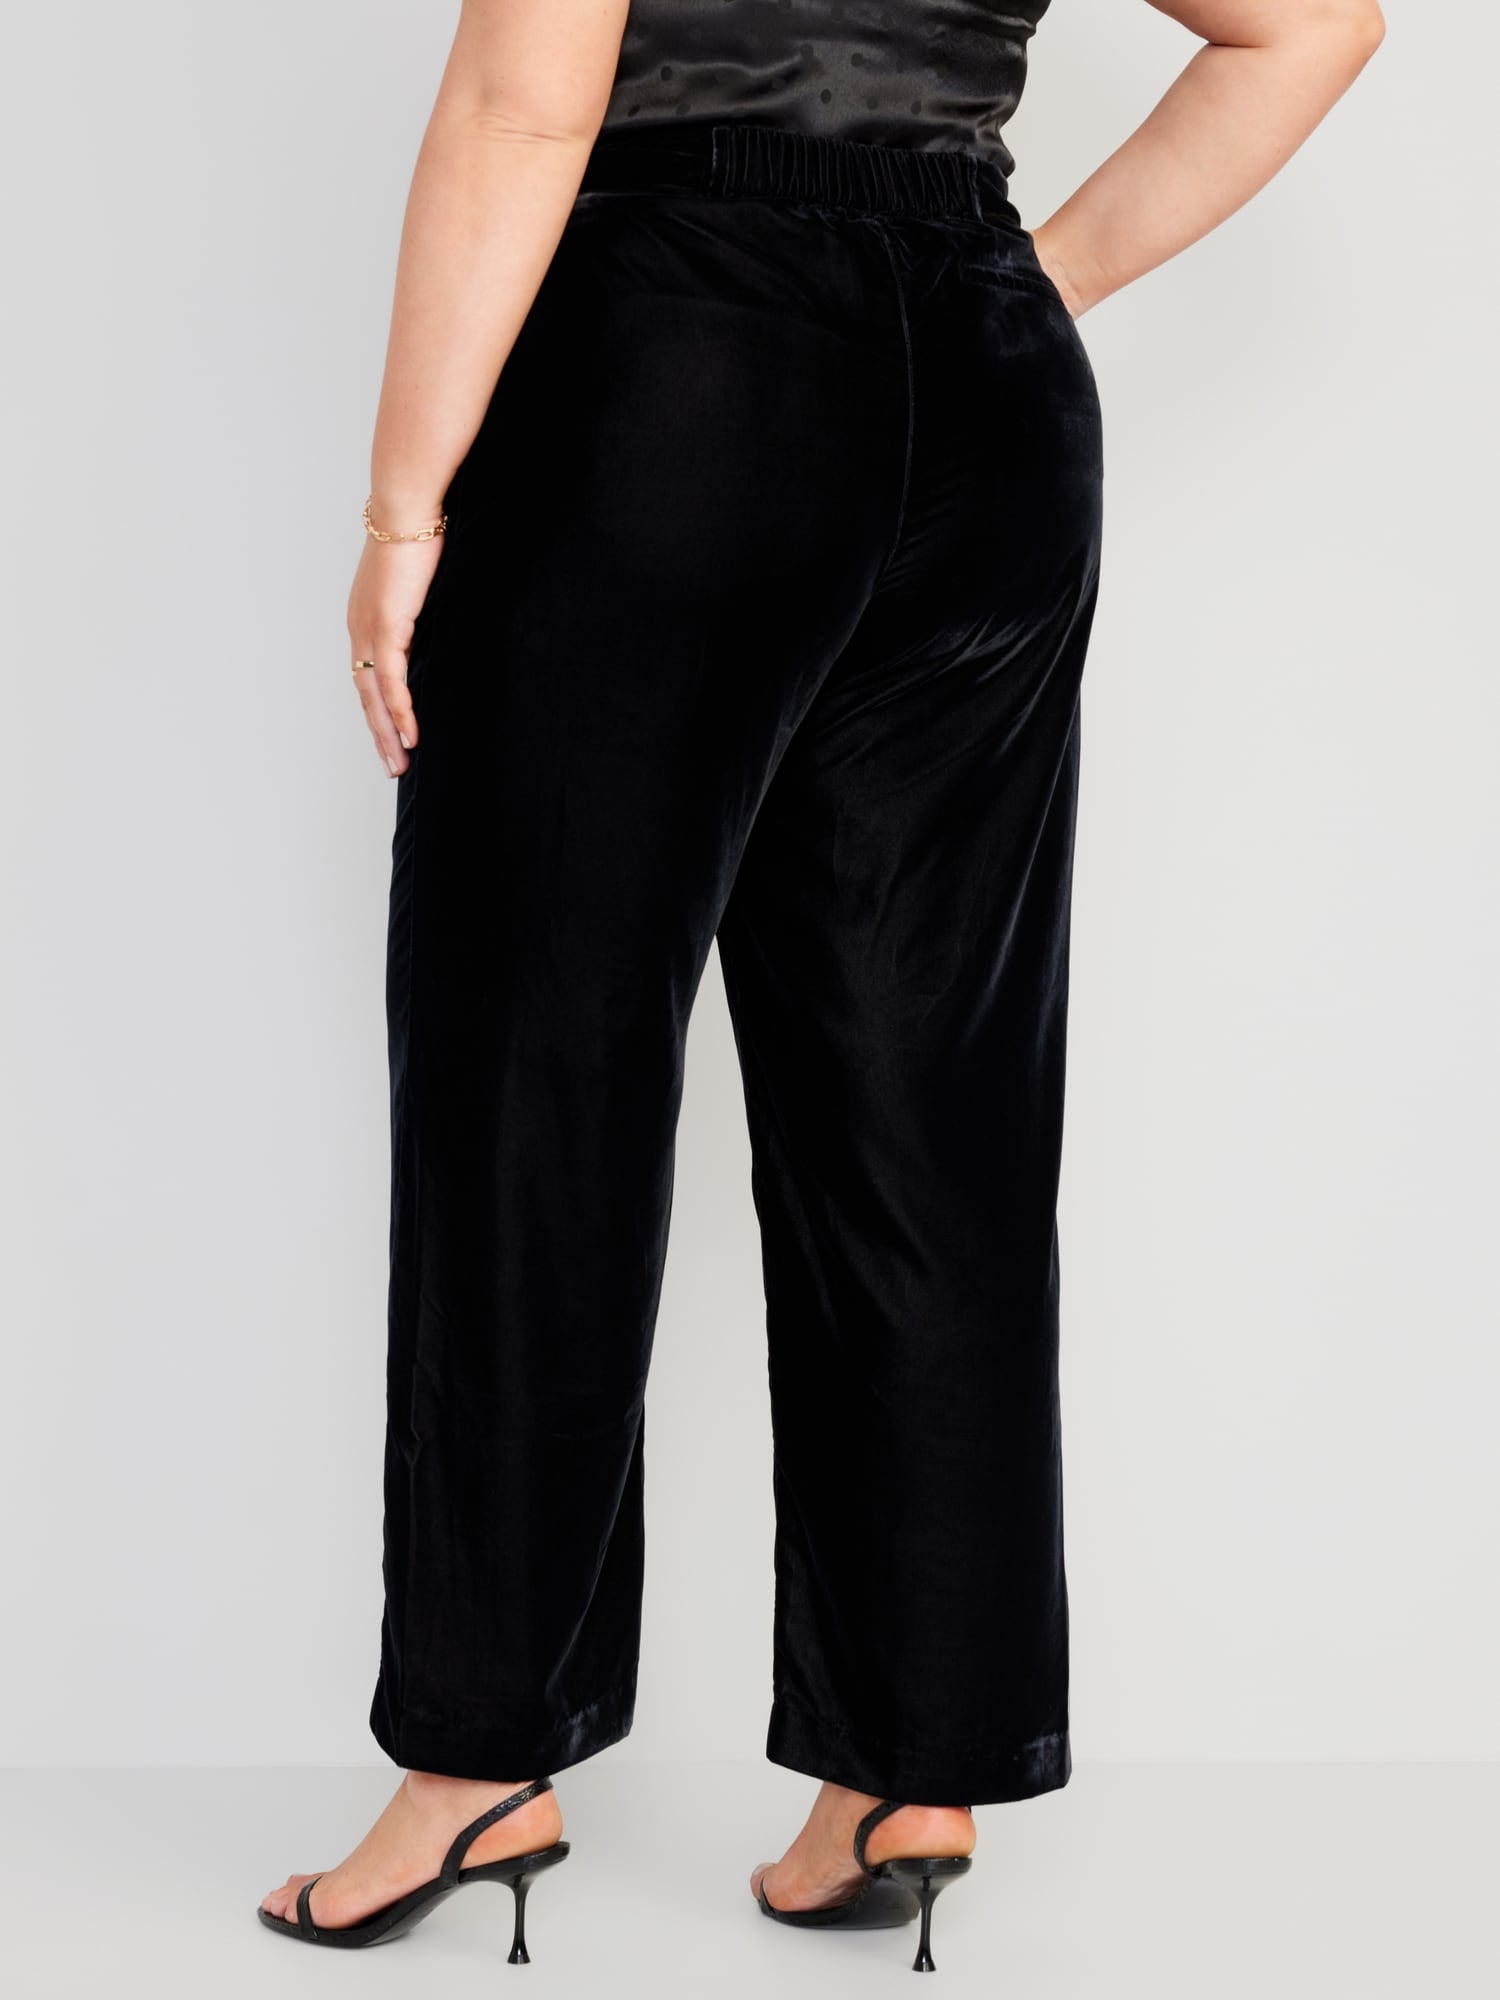 Extra High-Waisted Velvet Taylor Pants | Old Navy